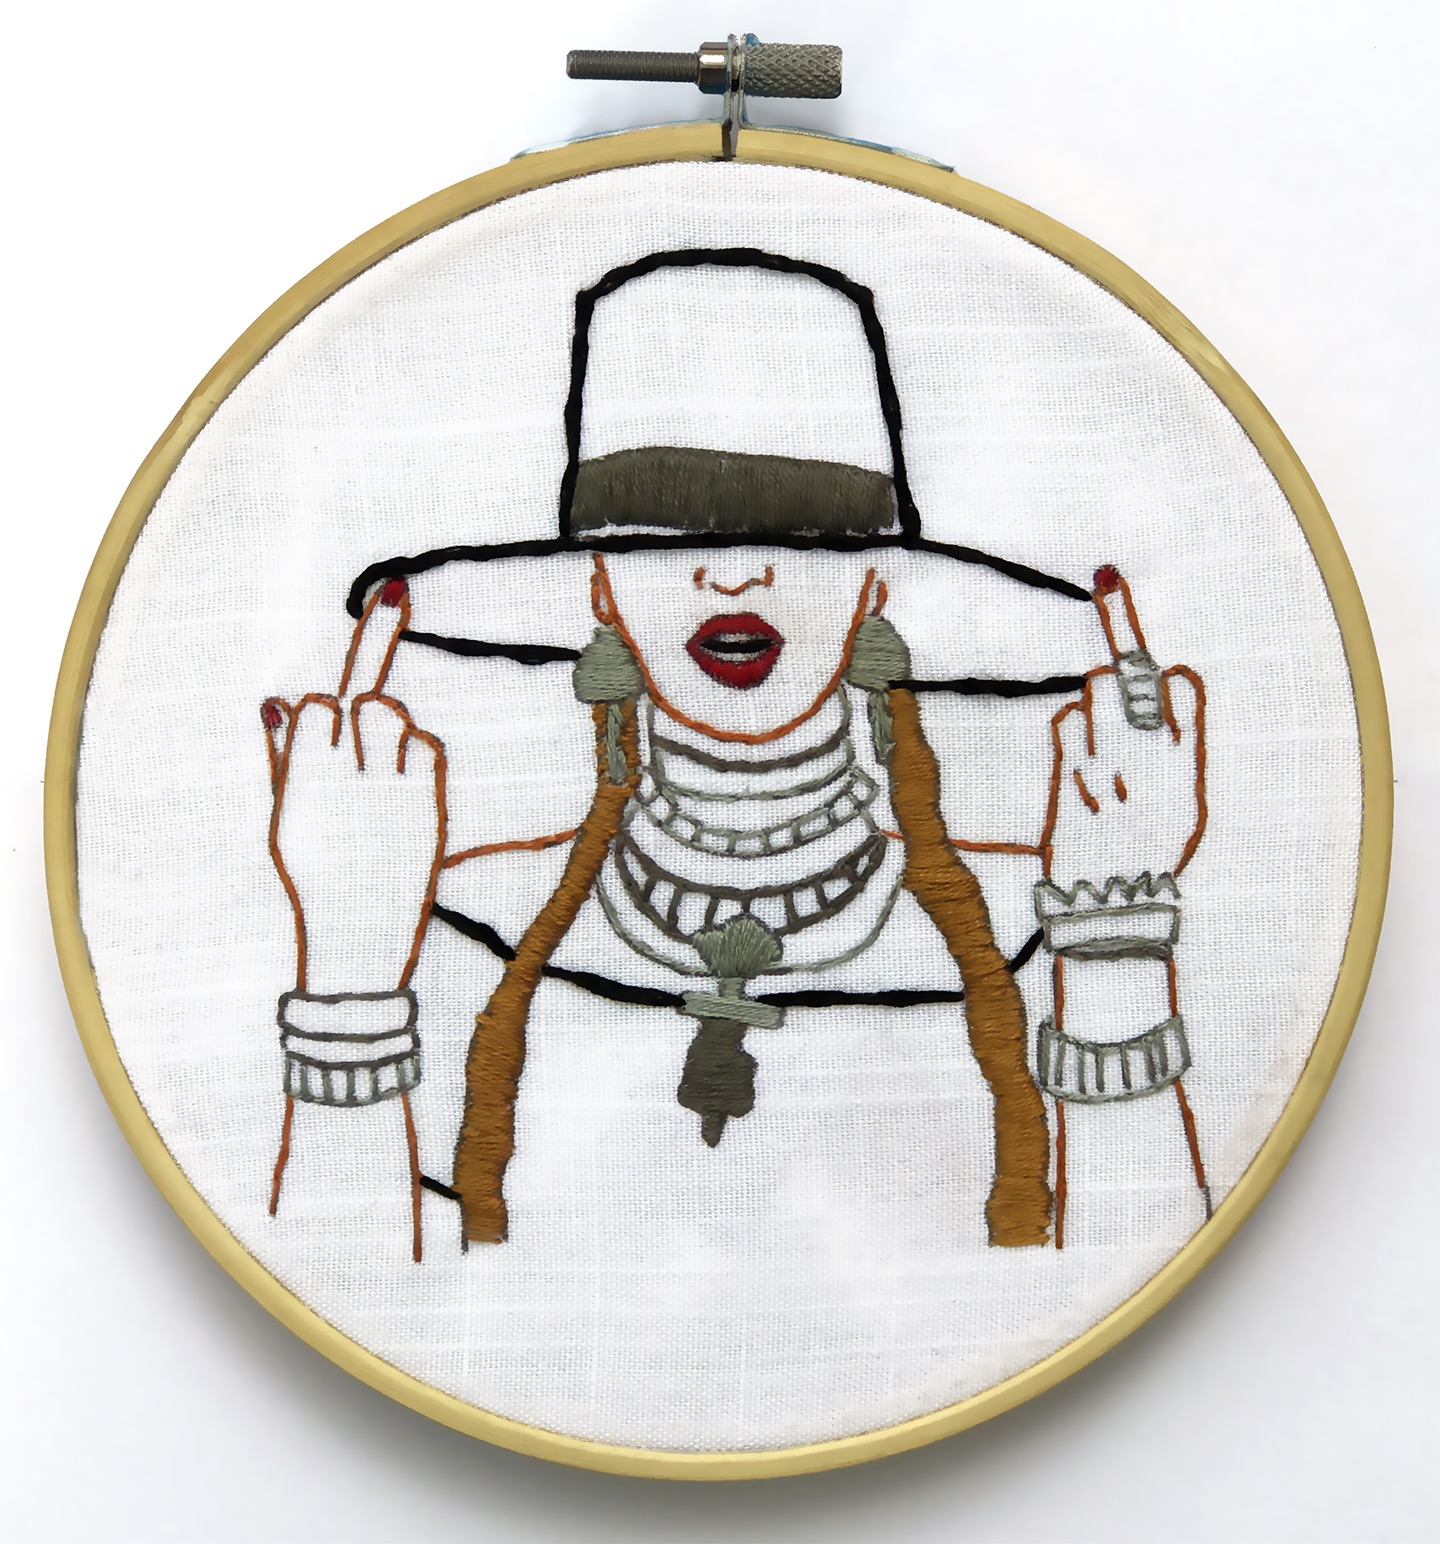 Cool feminist gifts: Custom DIY Beyonce Embroidery Hoop Kit from Create the Culture